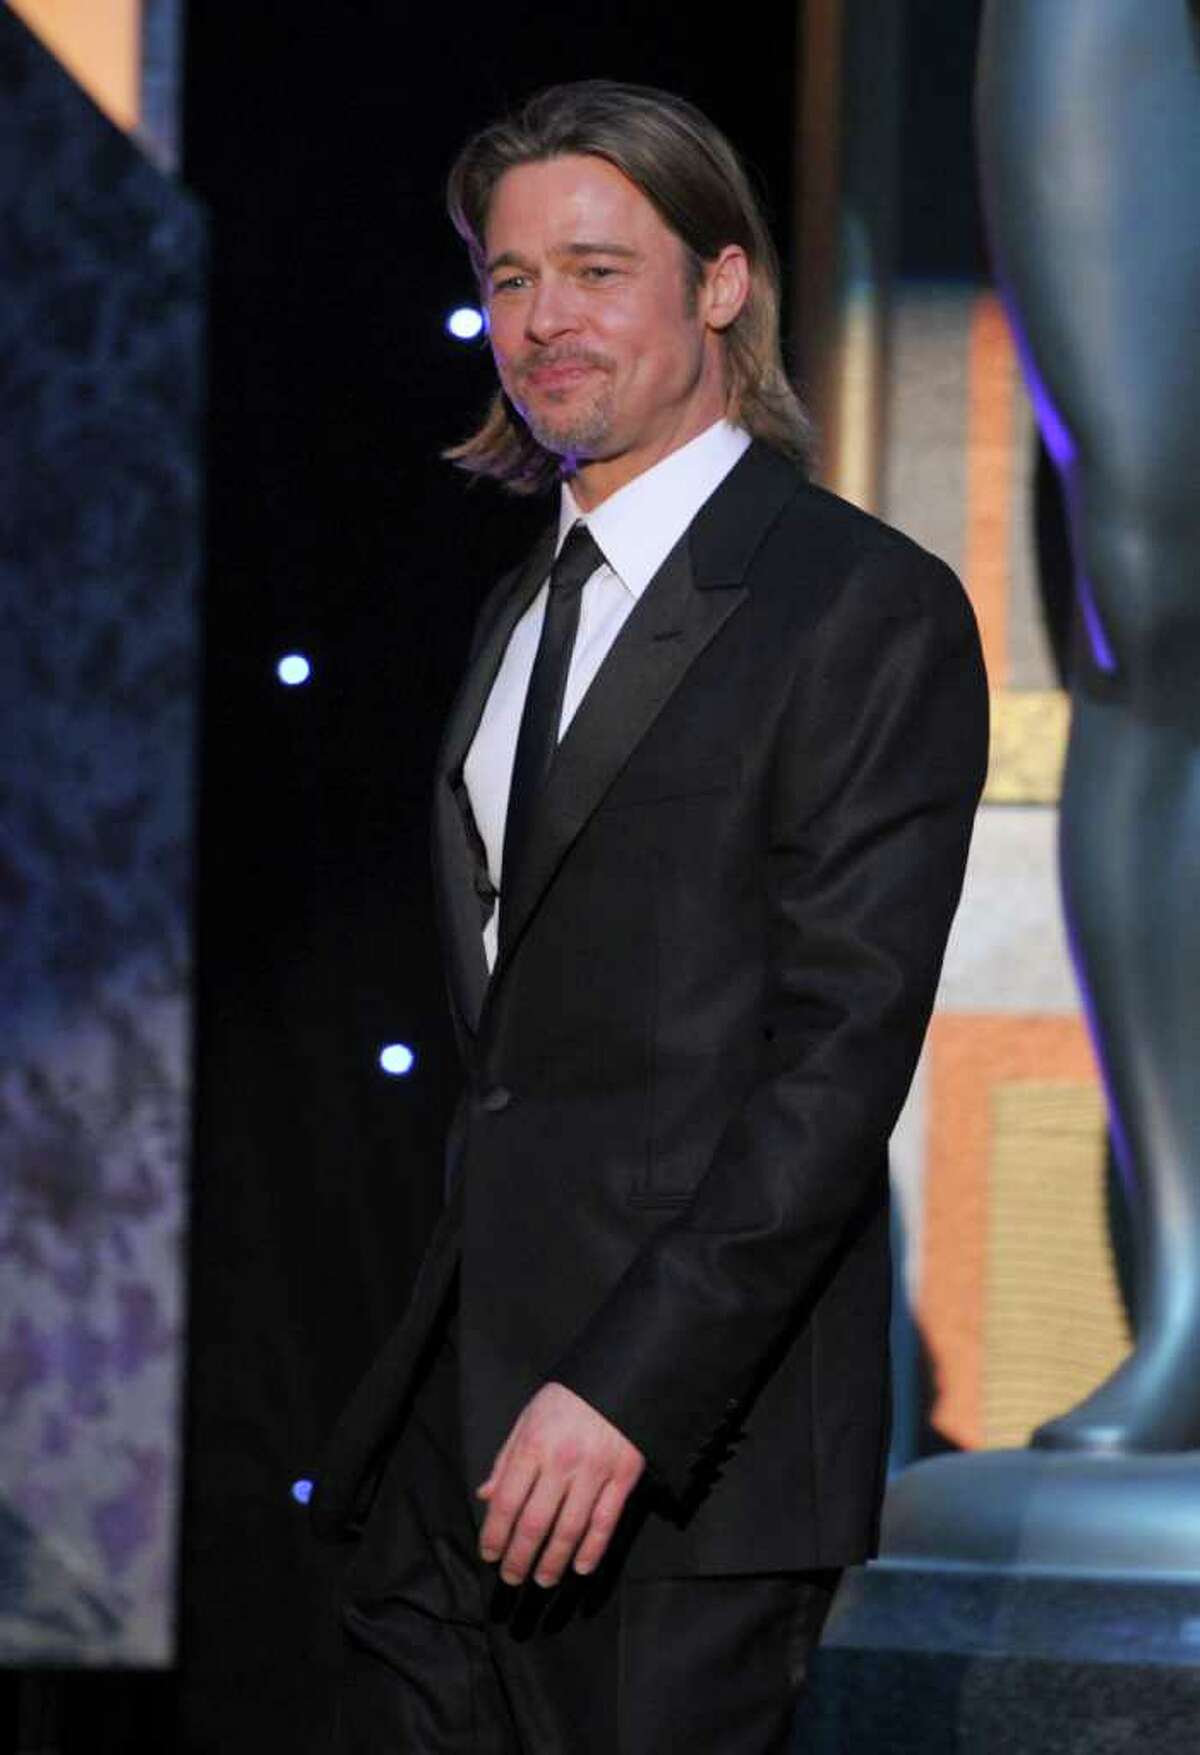 LOS ANGELES, CA - JANUARY 29: Actor Brad Pitt speaks onstage during the 18th Annual Screen Actors Guild Awards at The Shrine Auditorium on January 29, 2012 in Los Angeles, California. (Photo by Kevin Winter/Getty Images)